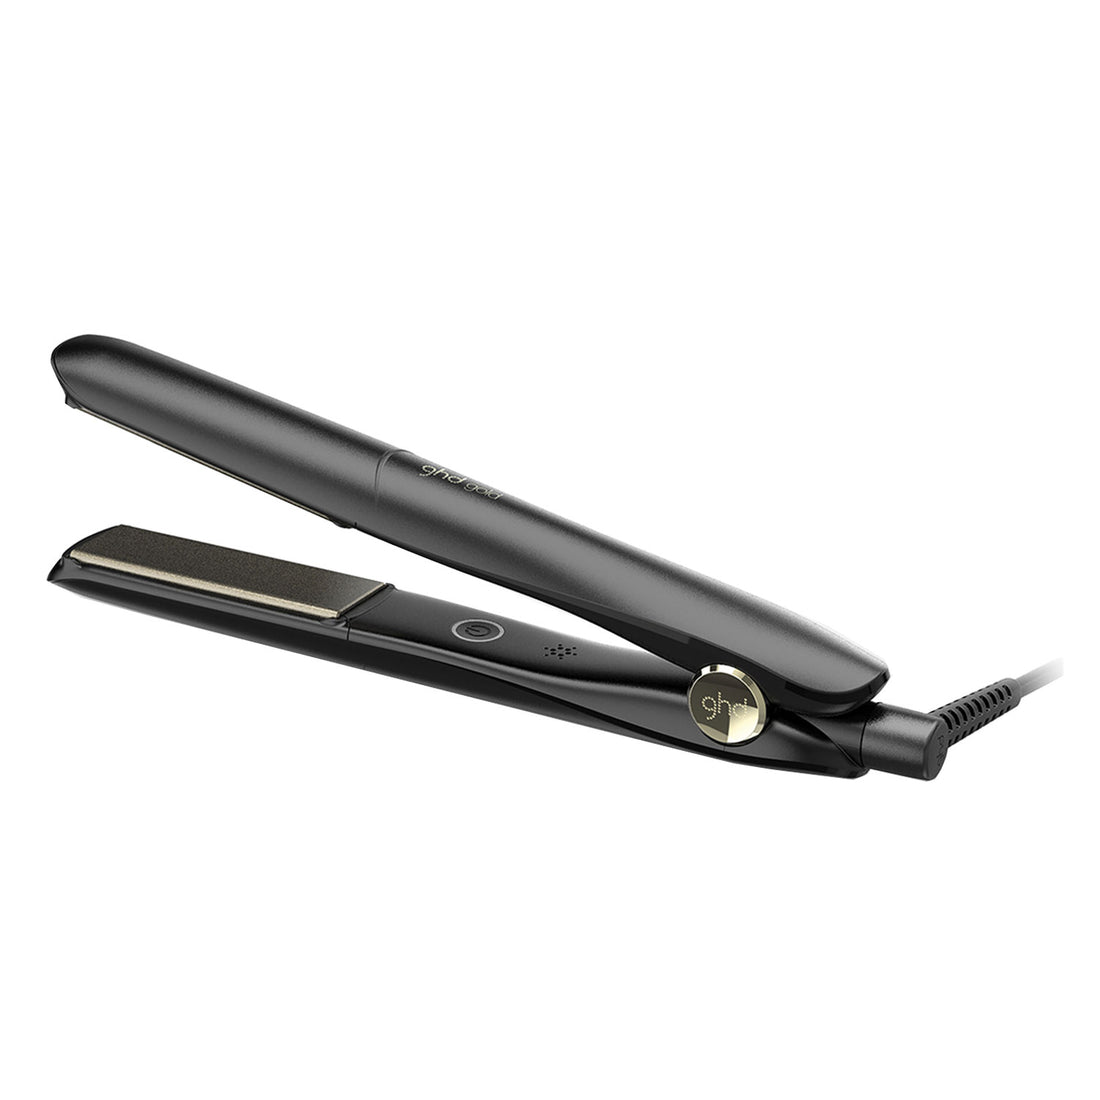 ghd gold® classic styler